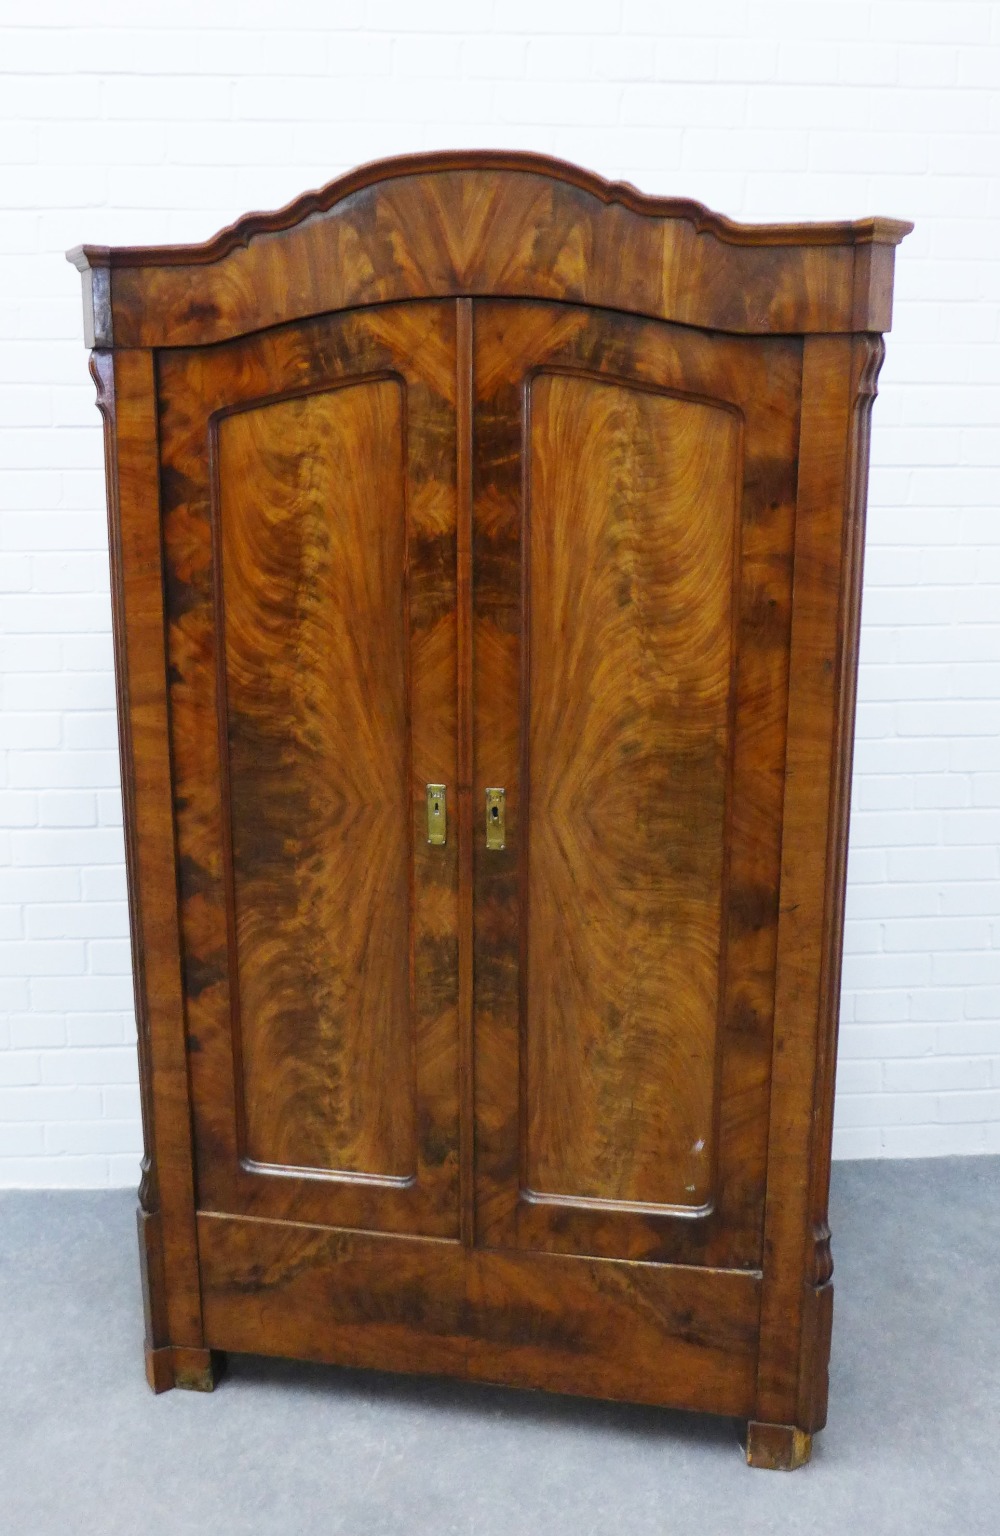 Late 19th / early 20th century flame mahogany, two door wardrobe of neat proportions, 182 x 109 x